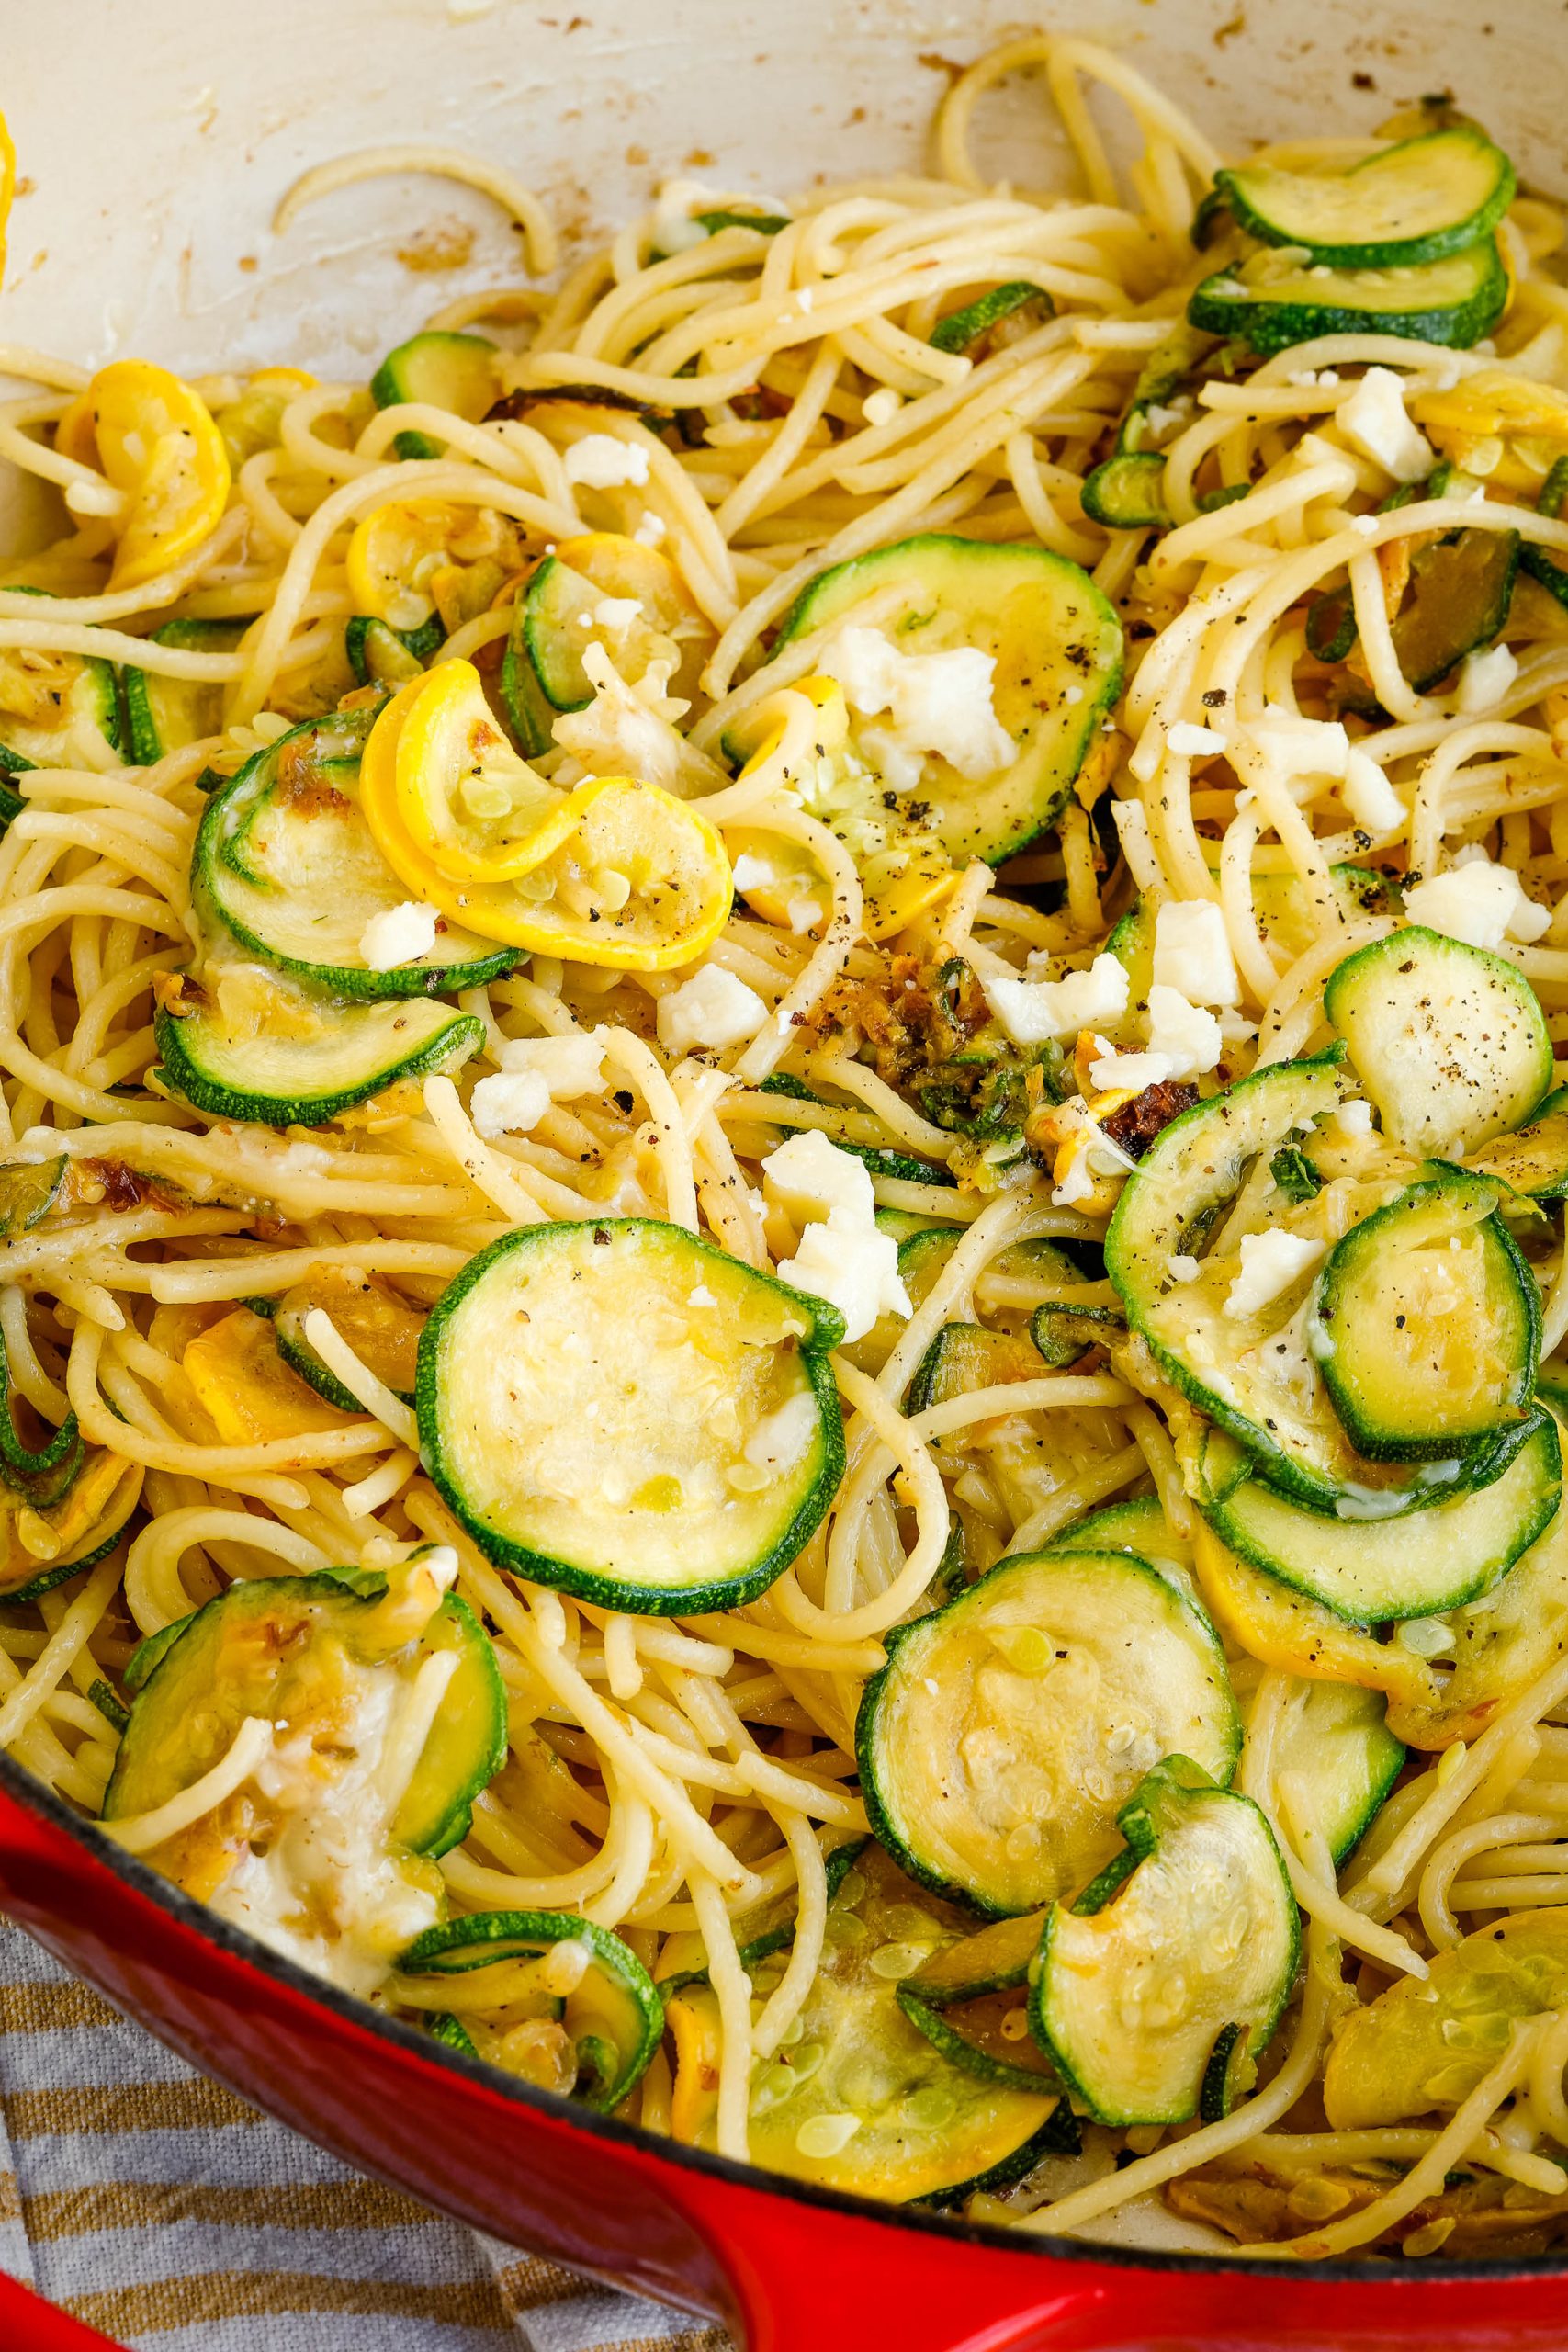 Zucchini Squash slice with noodles in a pan.